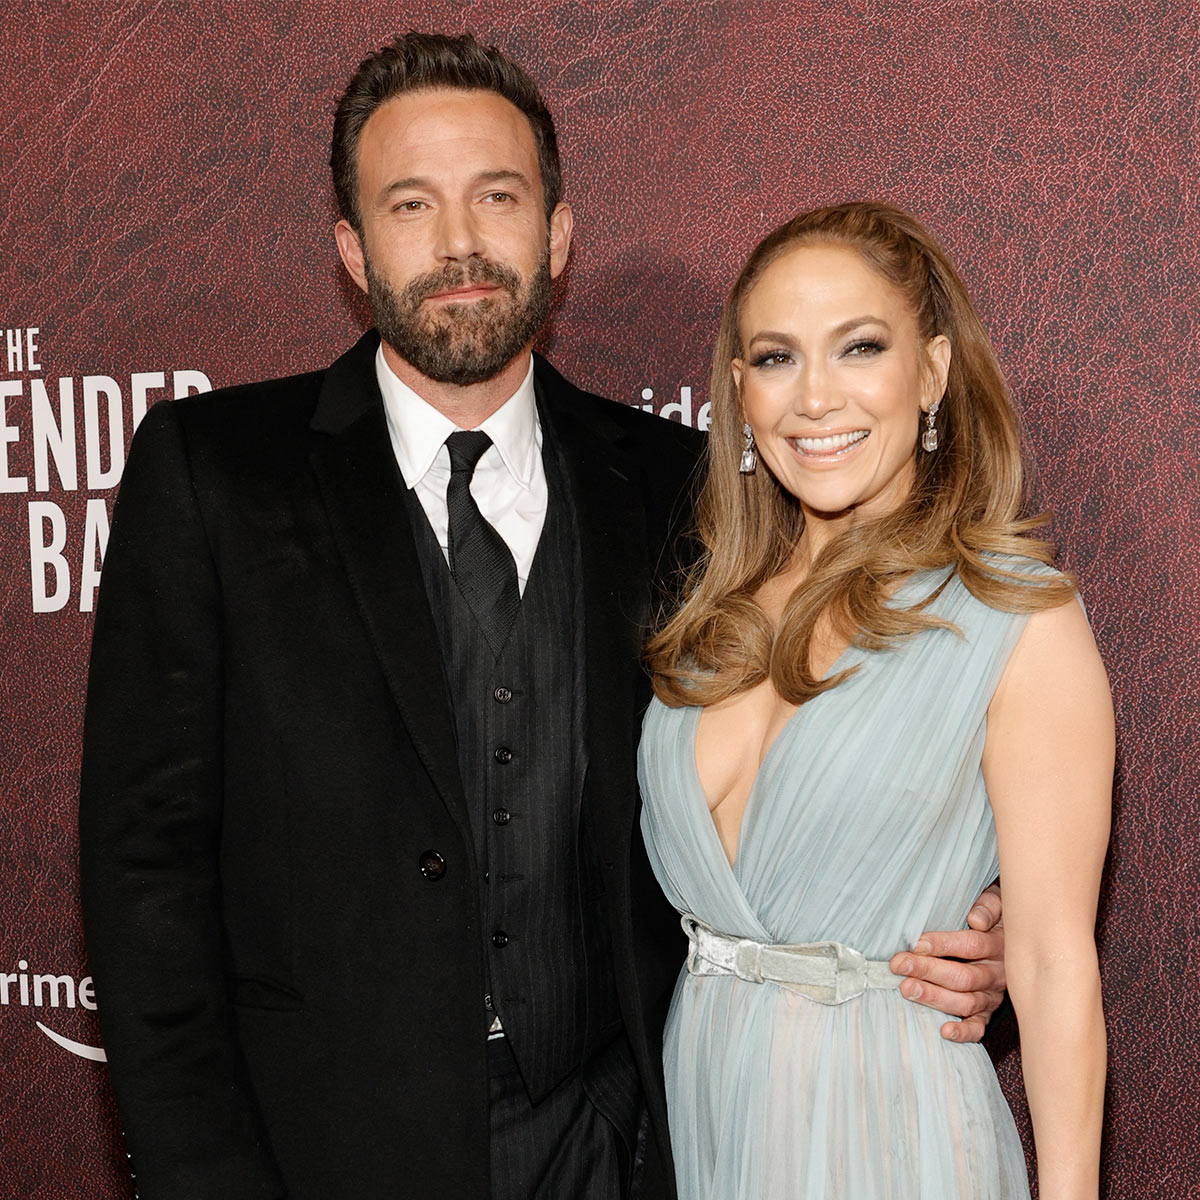 Ben Affleck’s Praise for Jennifer Lopez Will Have You Floating on Air